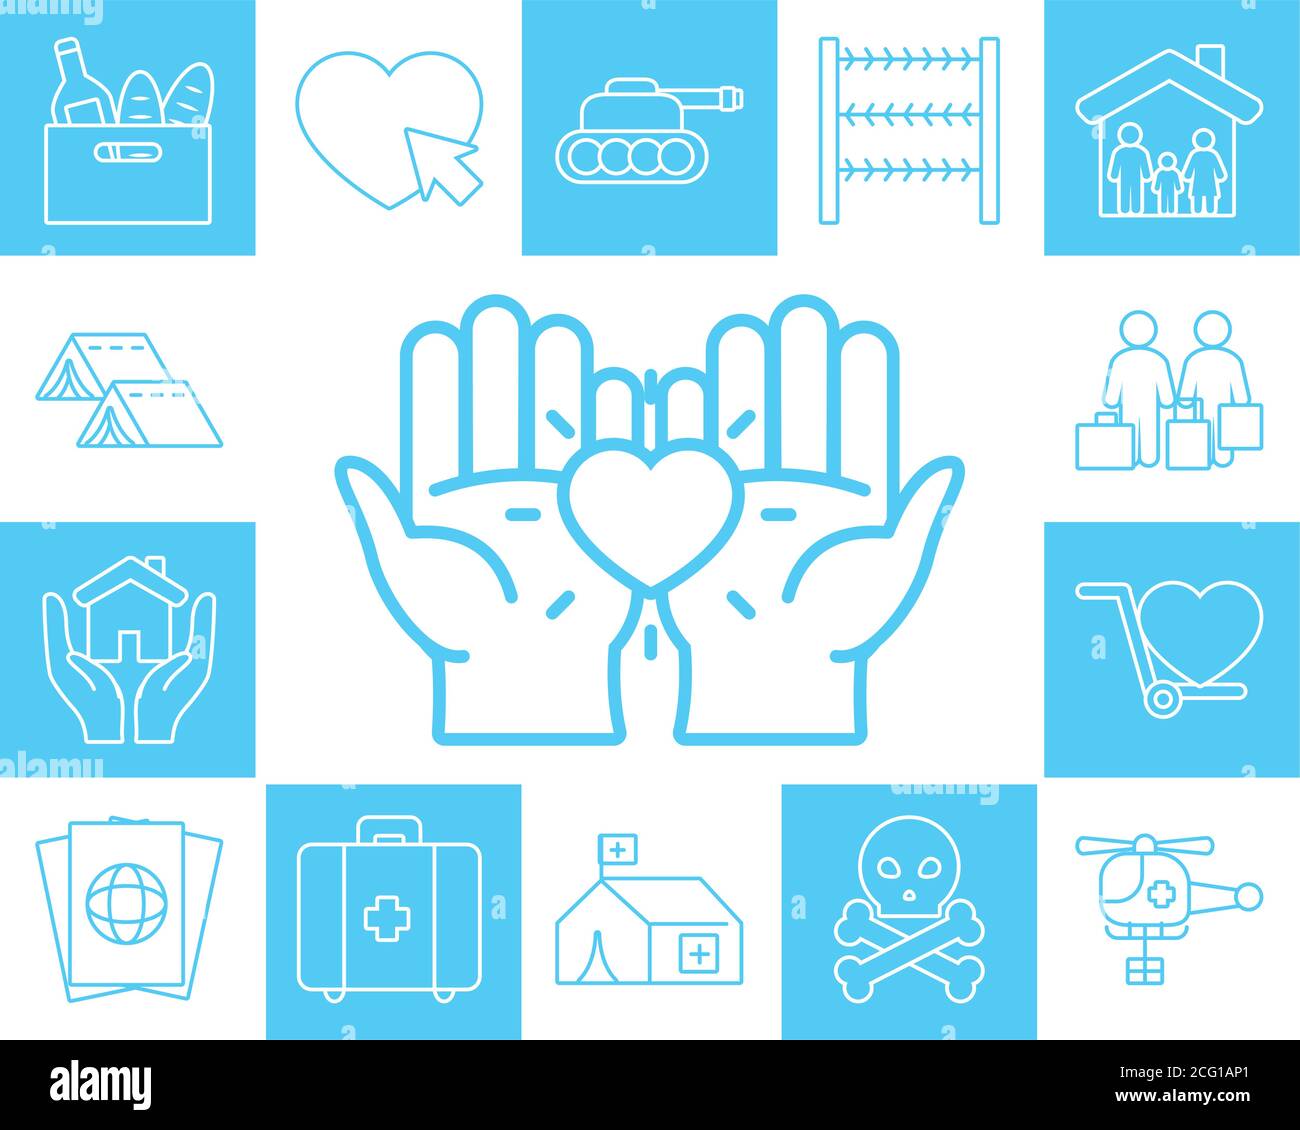 hands and humanitarian help icon set over blue and white background, line style, vector illustration Stock Vector